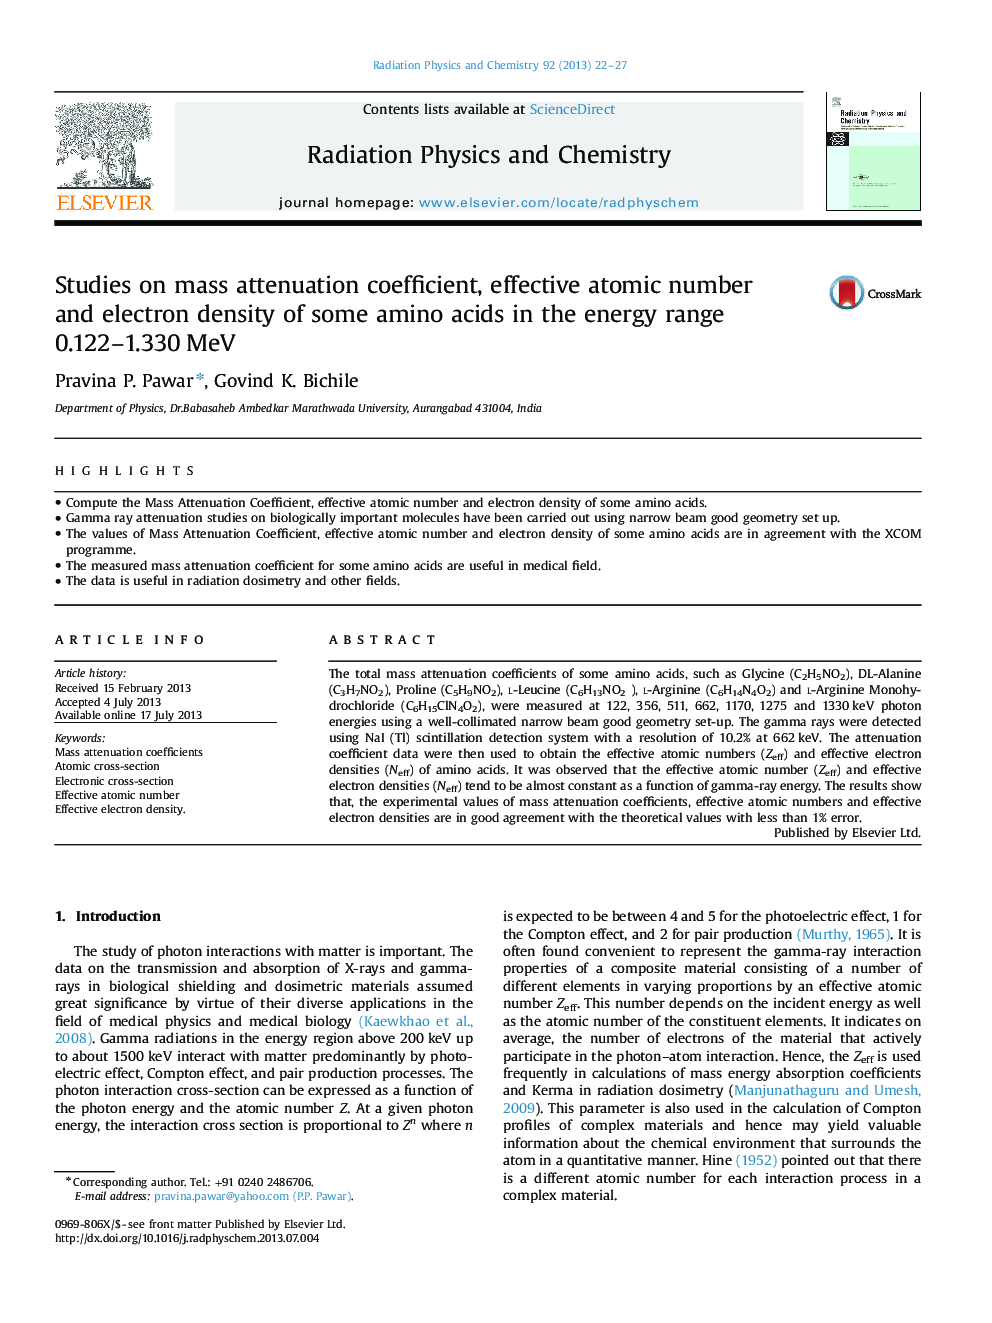 Studies on mass attenuation coefficient, effective atomic number and electron density of some amino acids in the energy range 0.122–1.330 MeV